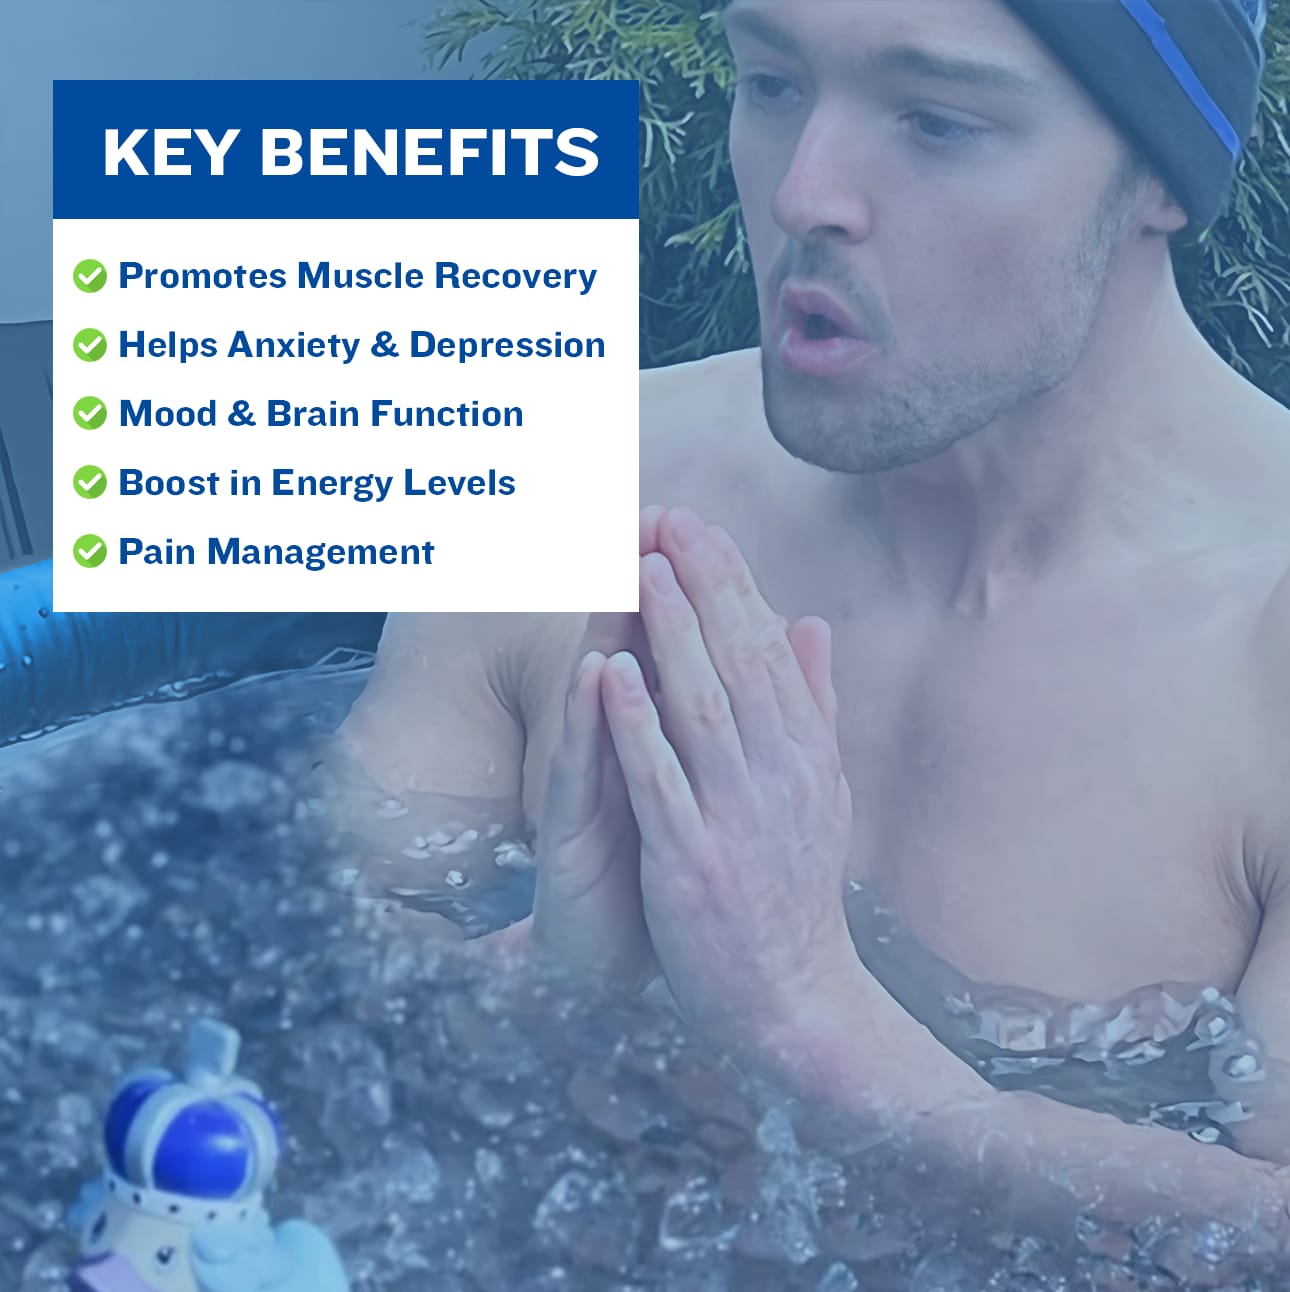 5 Ice Bath Benefits For Recovery